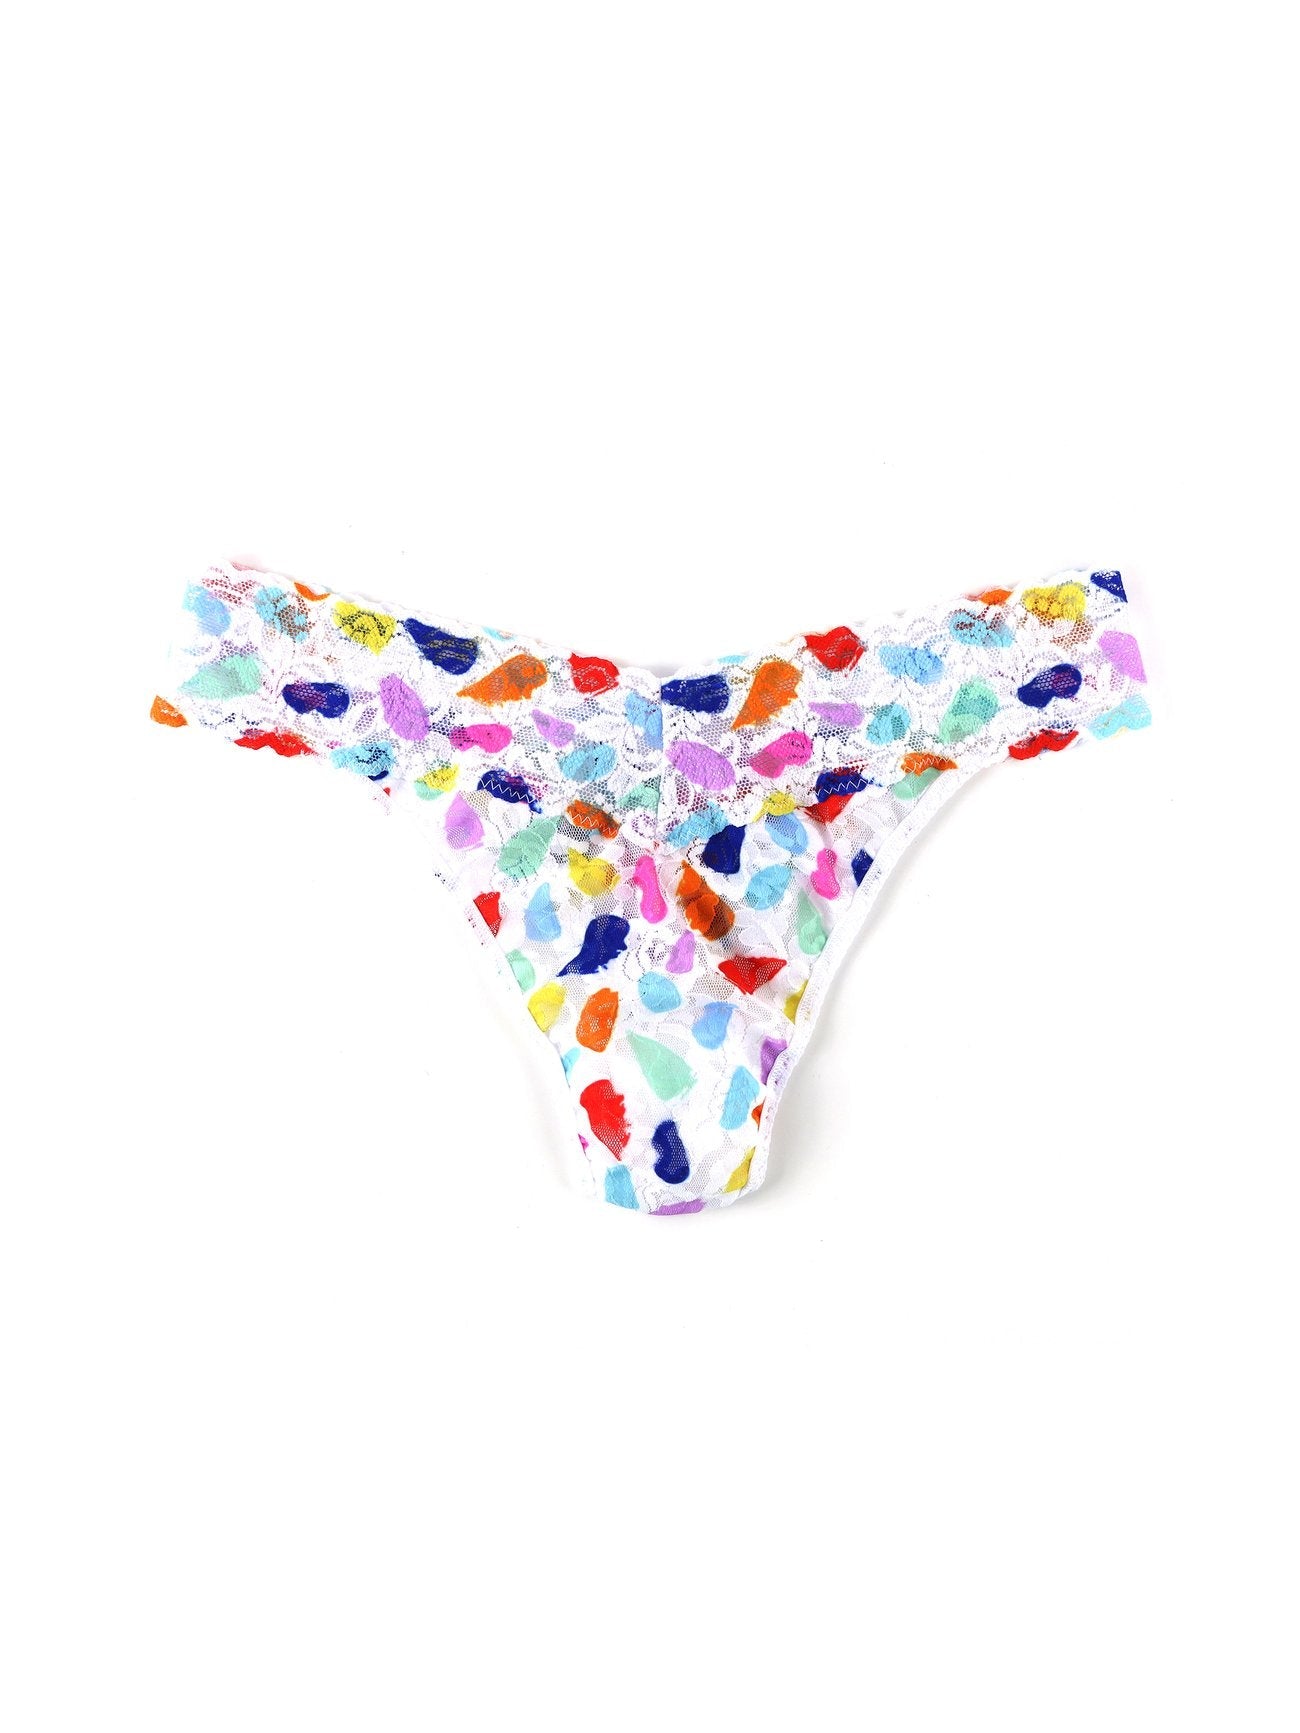 Hanky Panky Playful Expressions Thong - My Filosophy